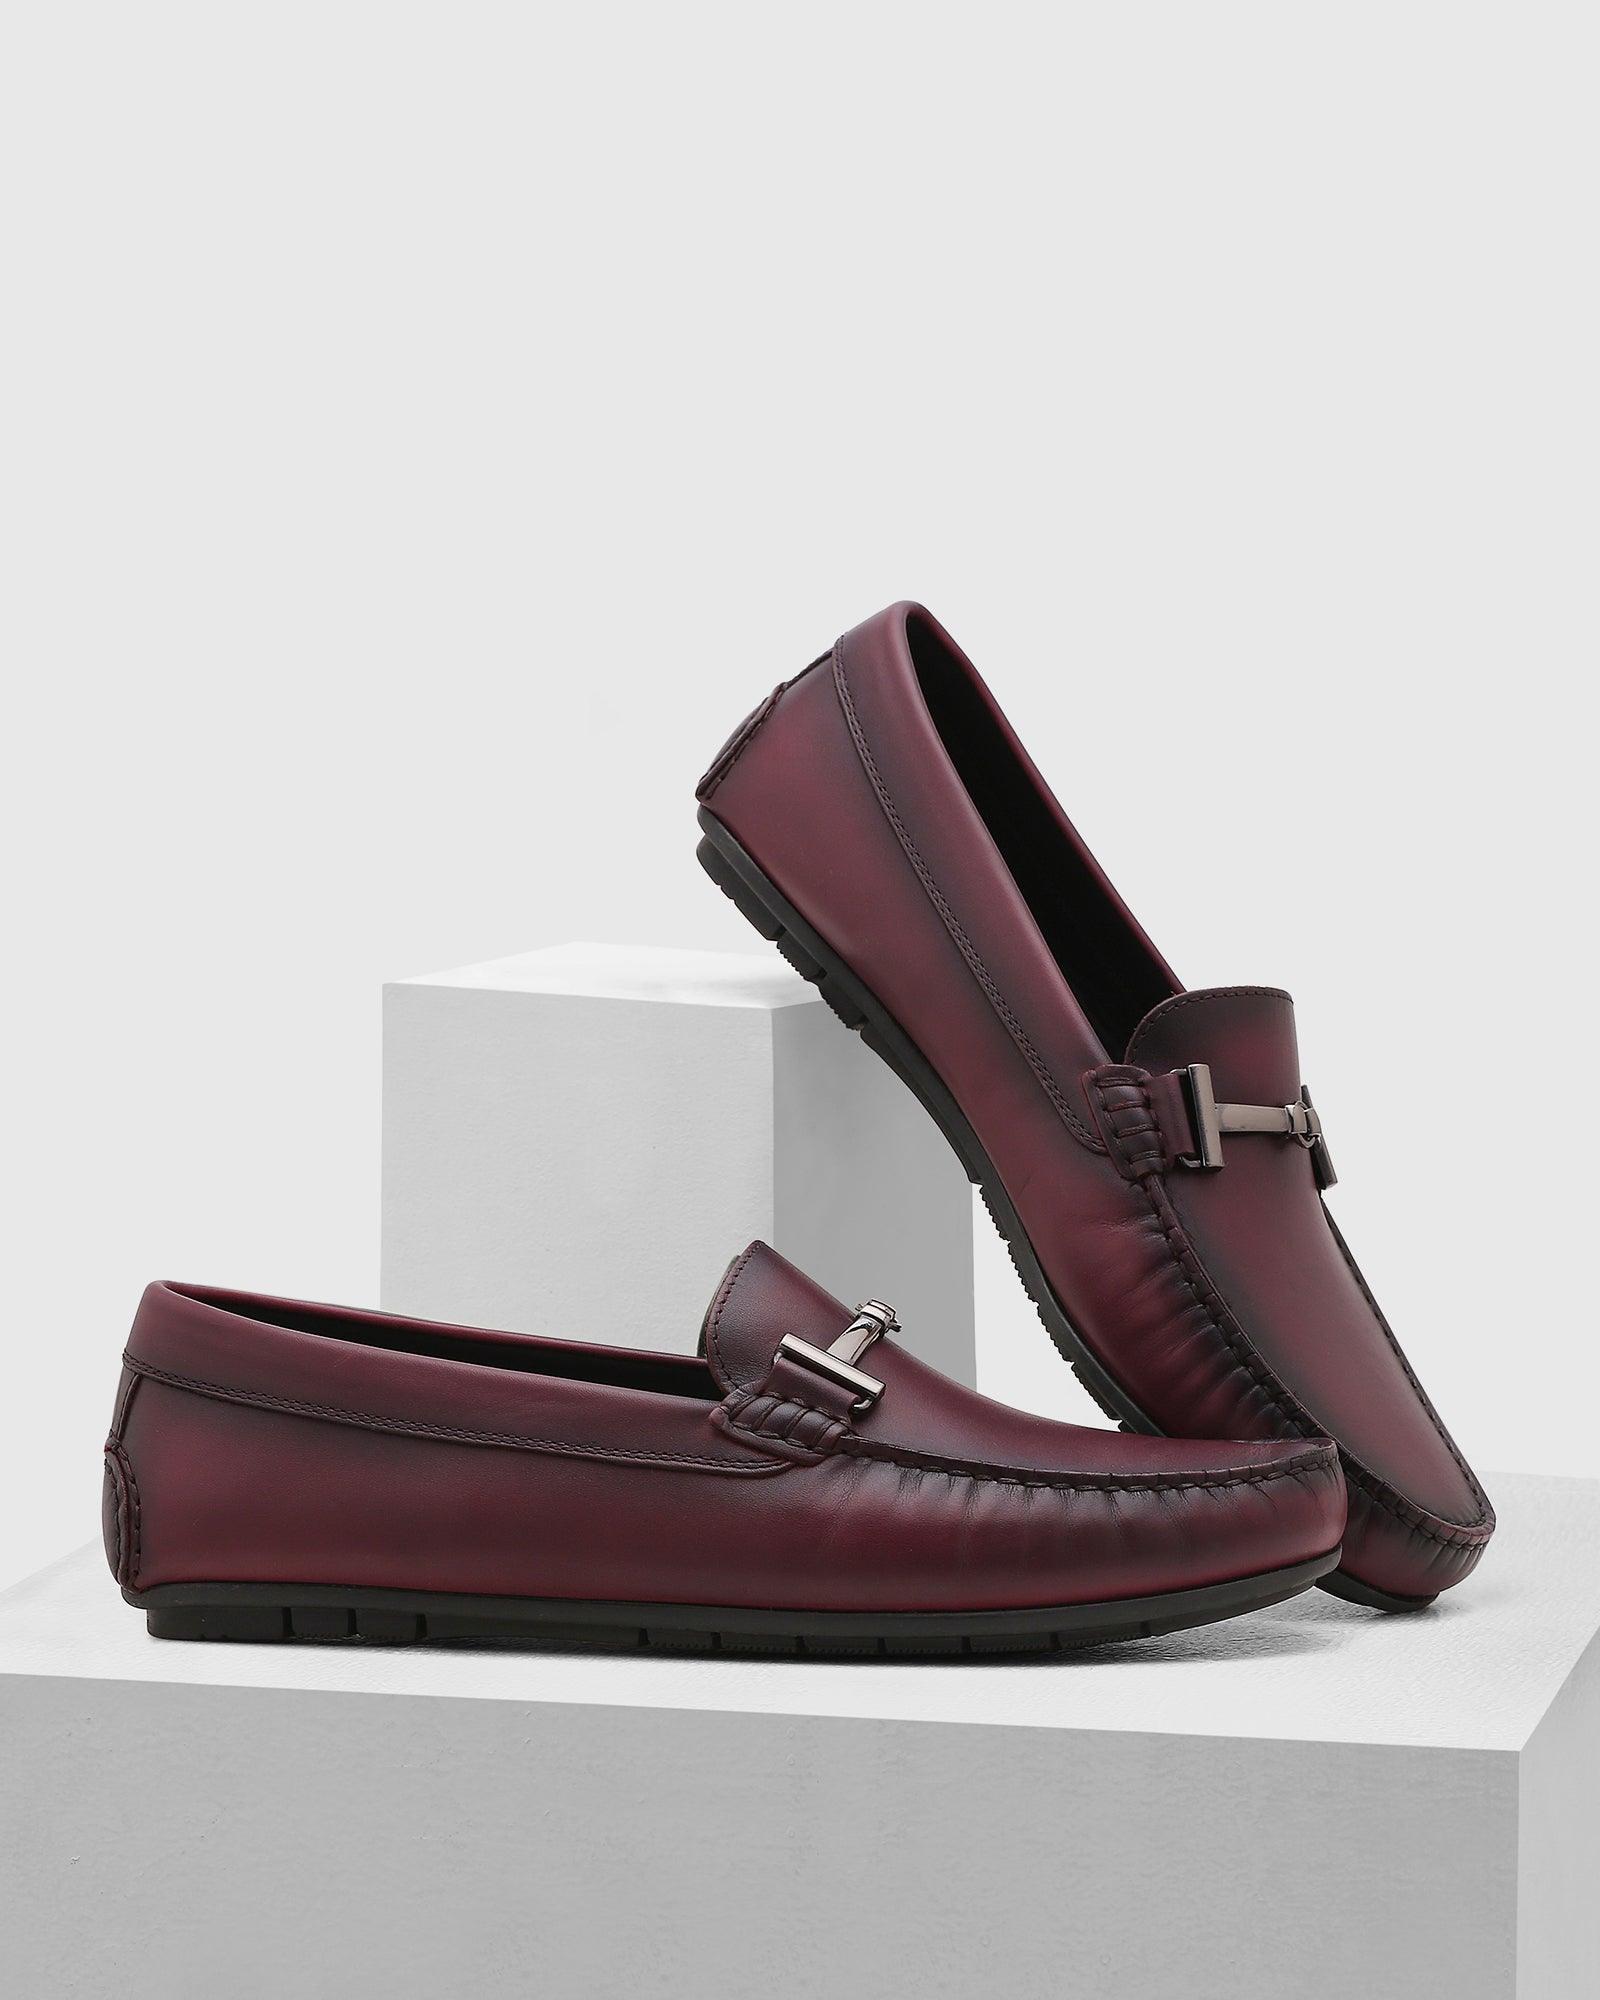 leather loafers shoes in wine (qanali)